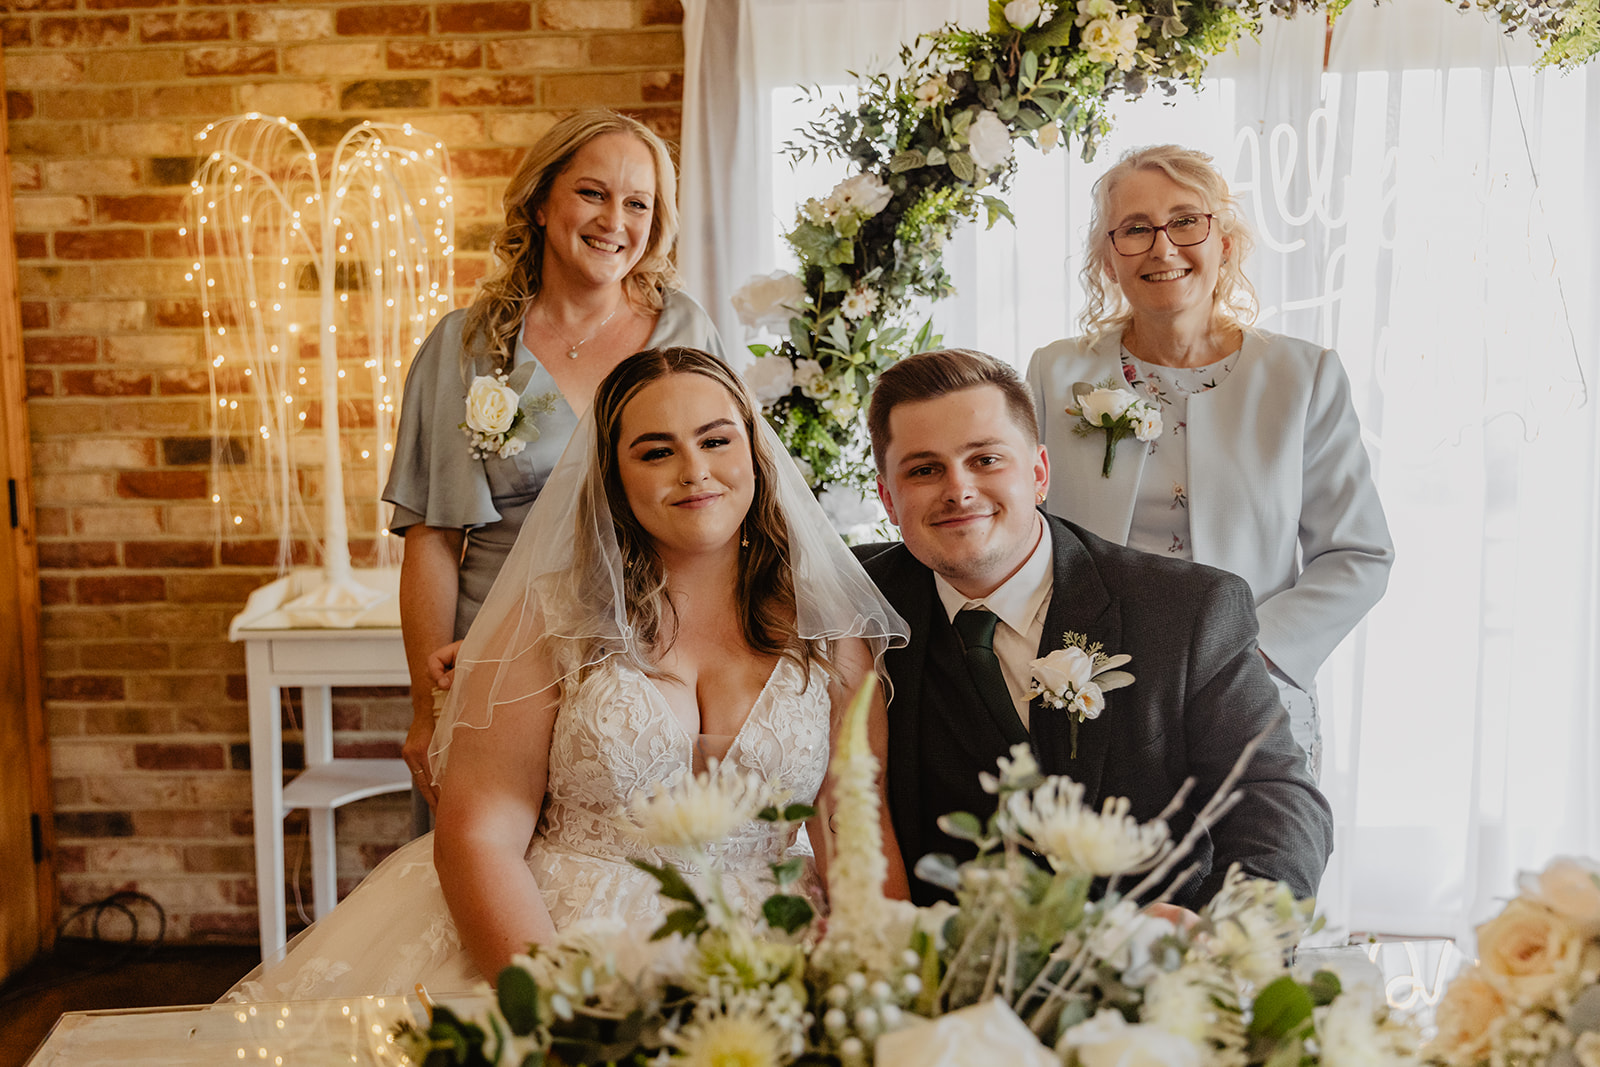 Bride and Groom and witnesses at a Long Furlong Barn Wedding in Worthing, Sussex. By Olive Joy Photography.